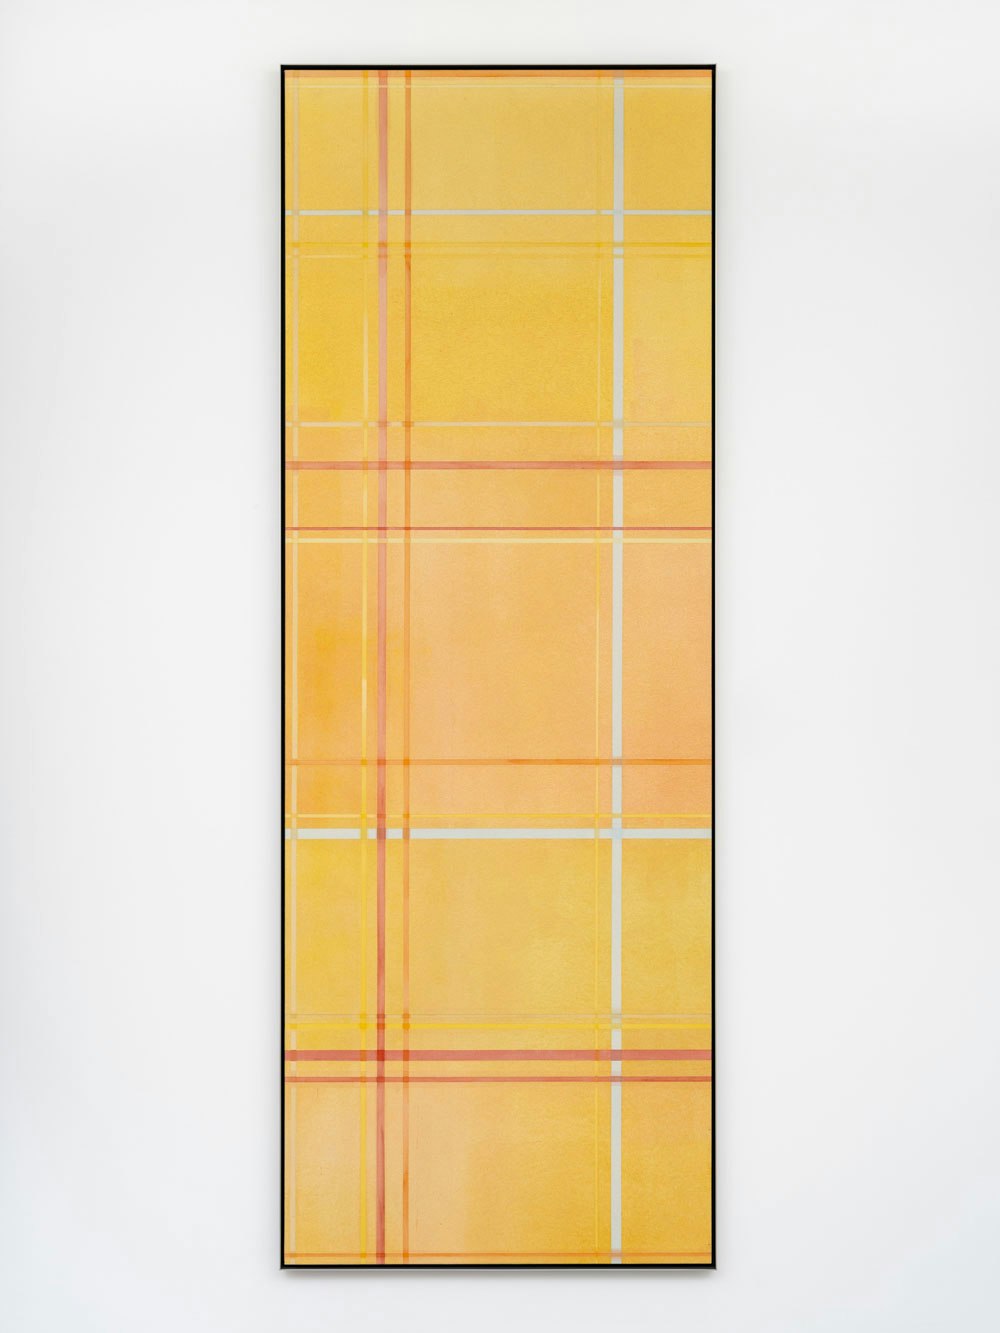 Kenneth Noland, Untitled, 1972. Acrylic on canvas, 112 1/2 × 40 3/4 inches. © The Kenneth Noland. Foundation / Artists Rights Society (ARS), New York.